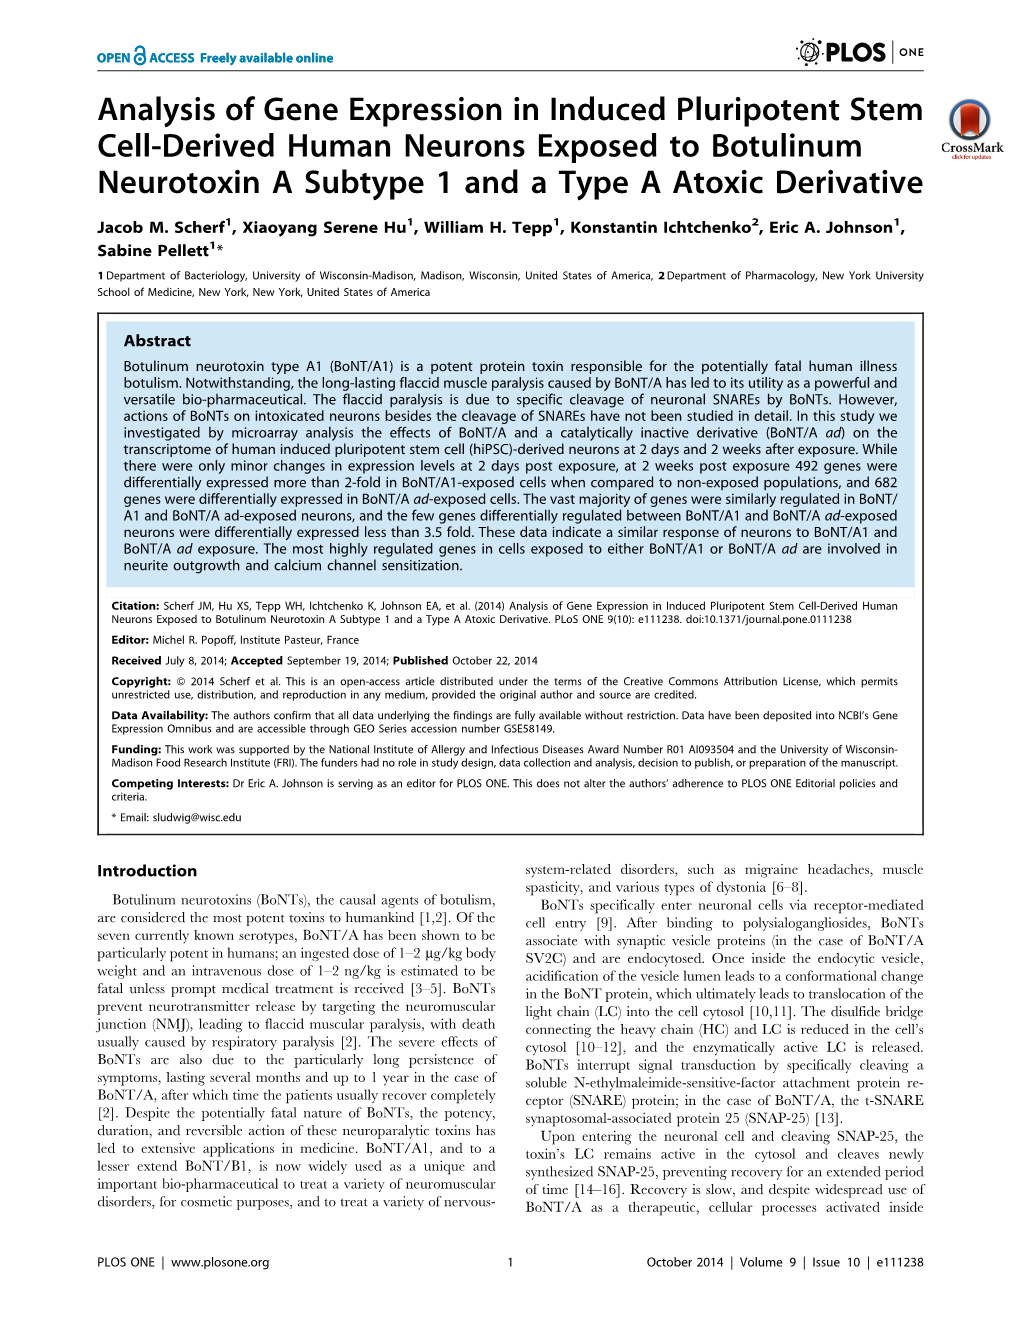 Analysis of Gene Expression in Induced Pluripotent Stem Cell-Derived Human Neurons Exposed to Botulinum Neurotoxin a Subtype 1 and a Type a Atoxic Derivative